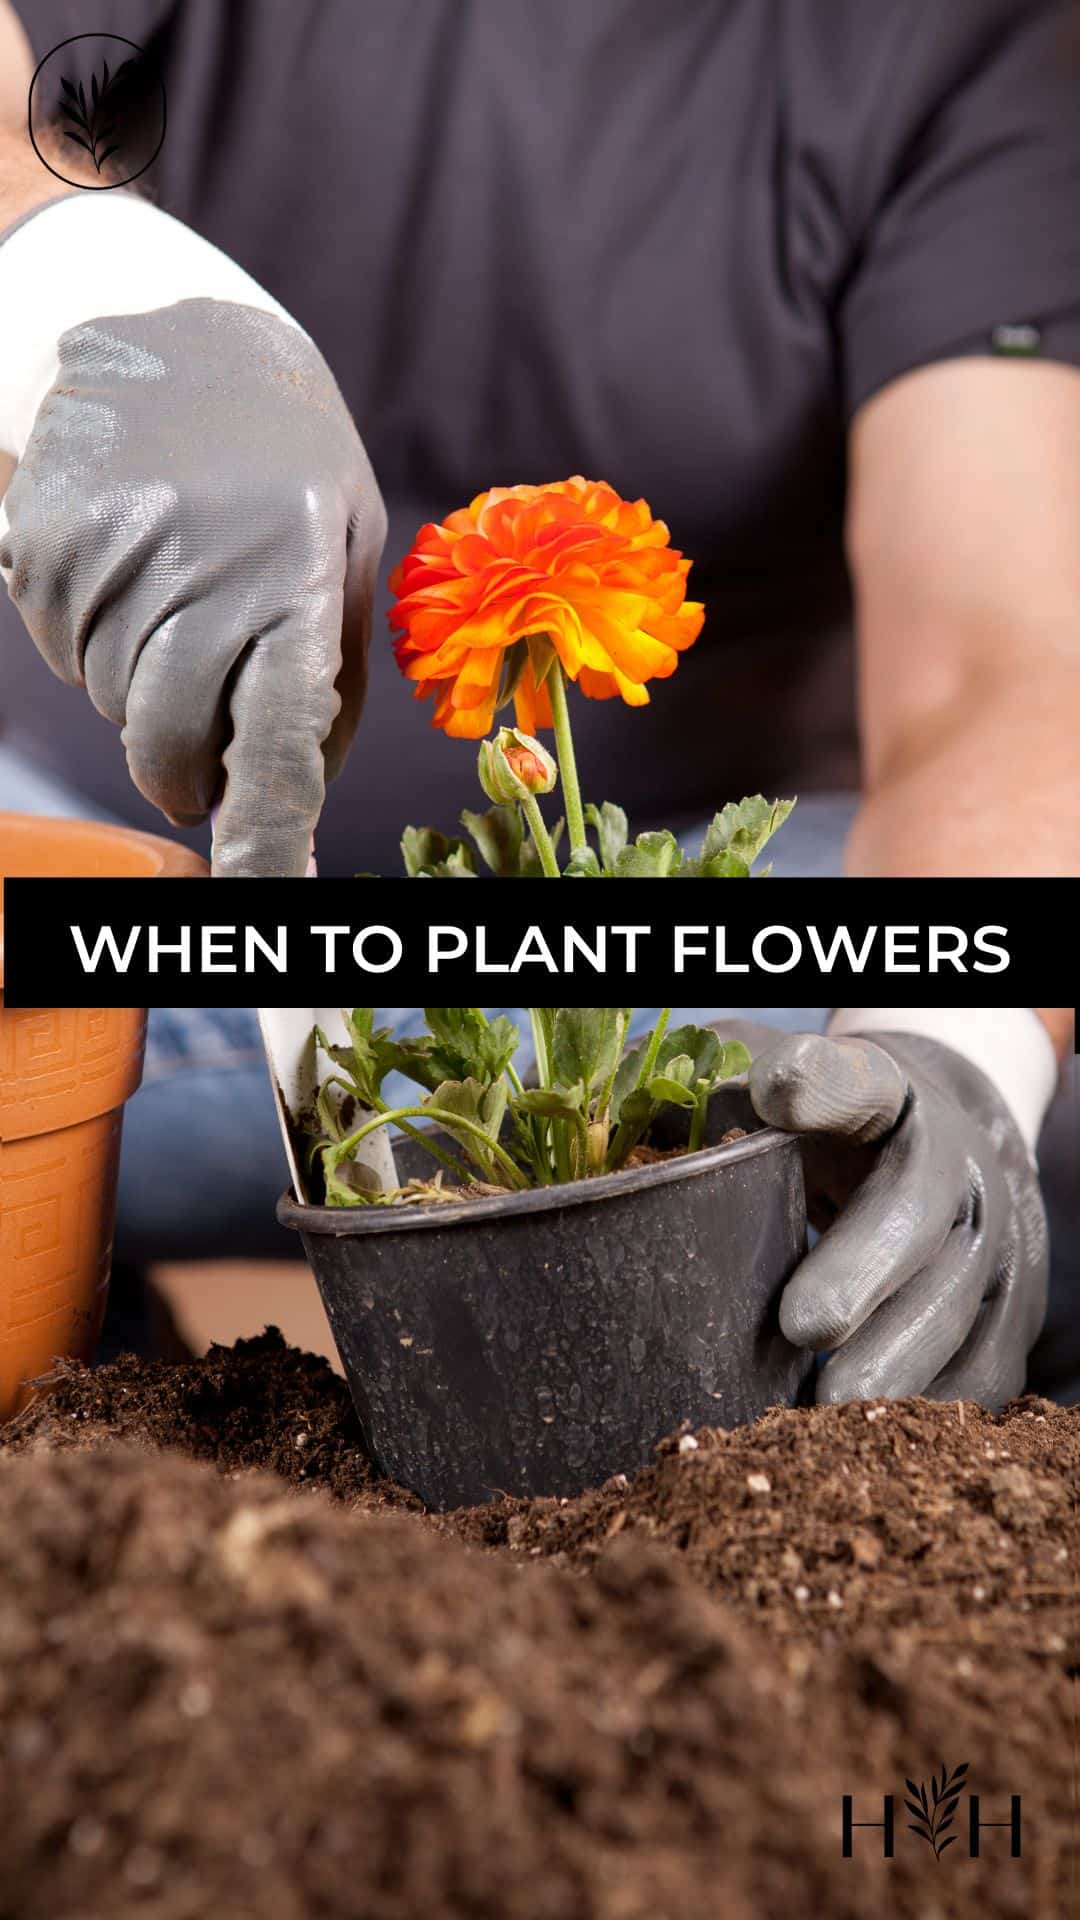 When to plant flowers via @home4theharvest